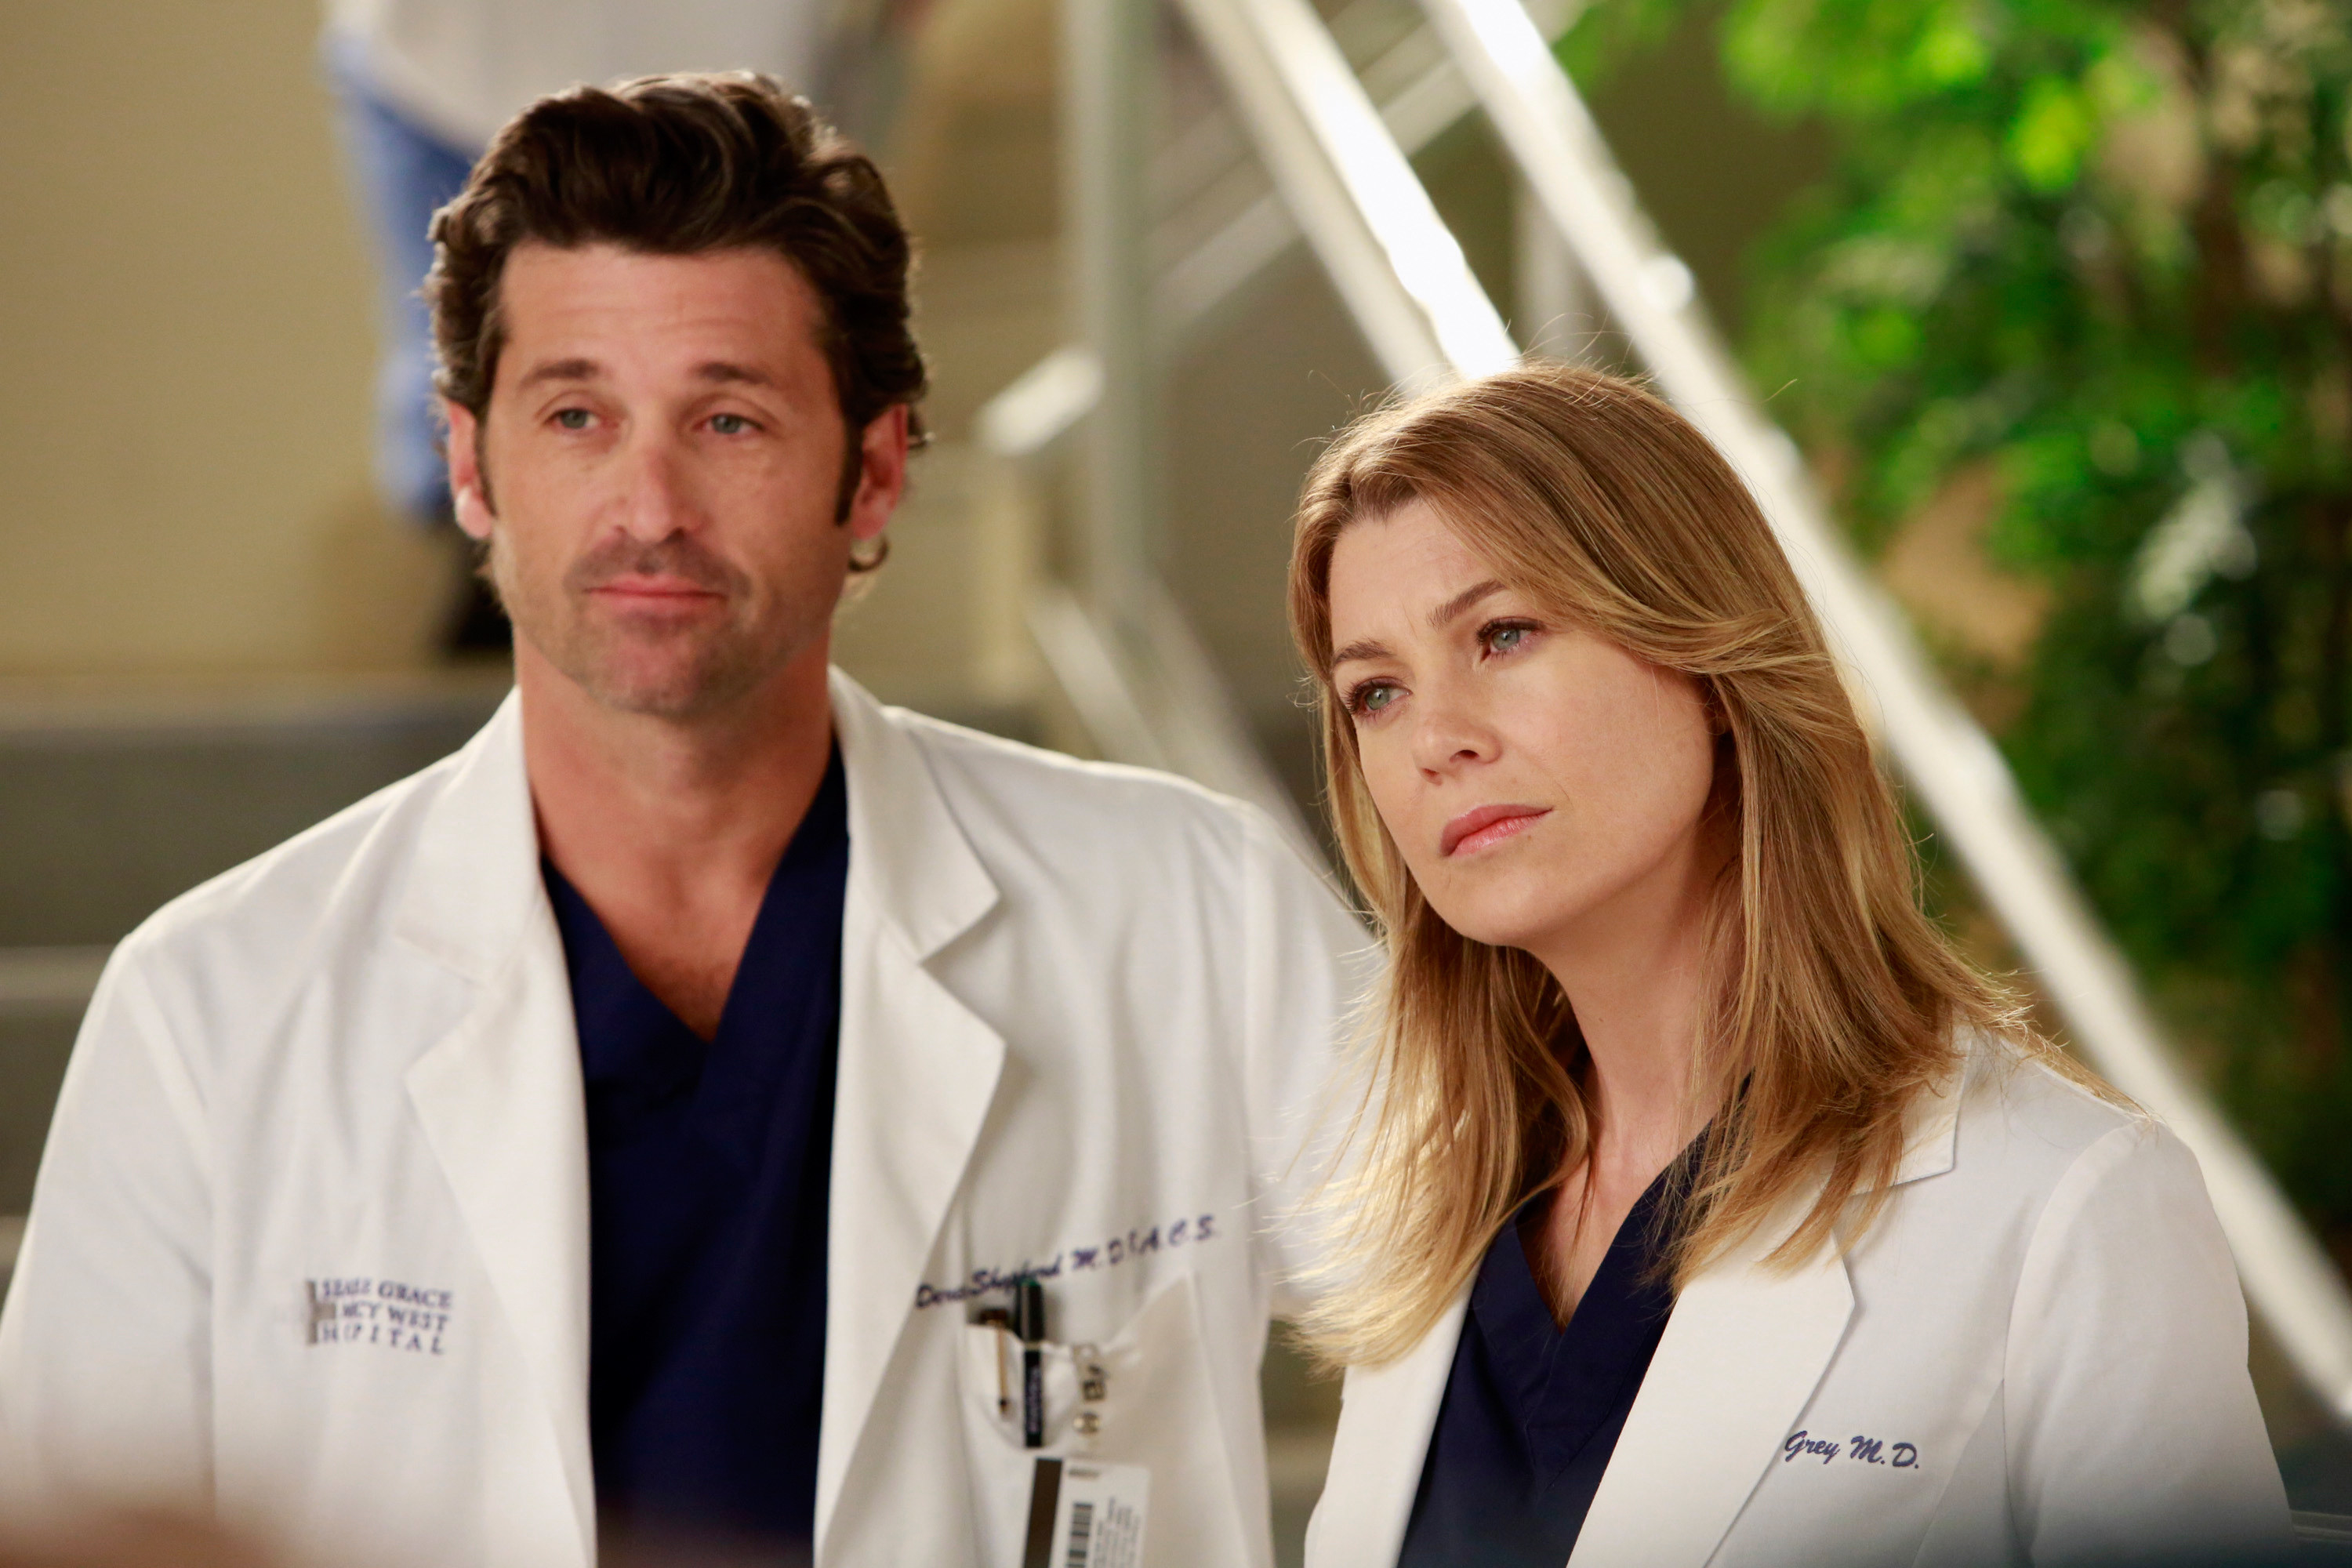 Meredith standing next to McDreamy